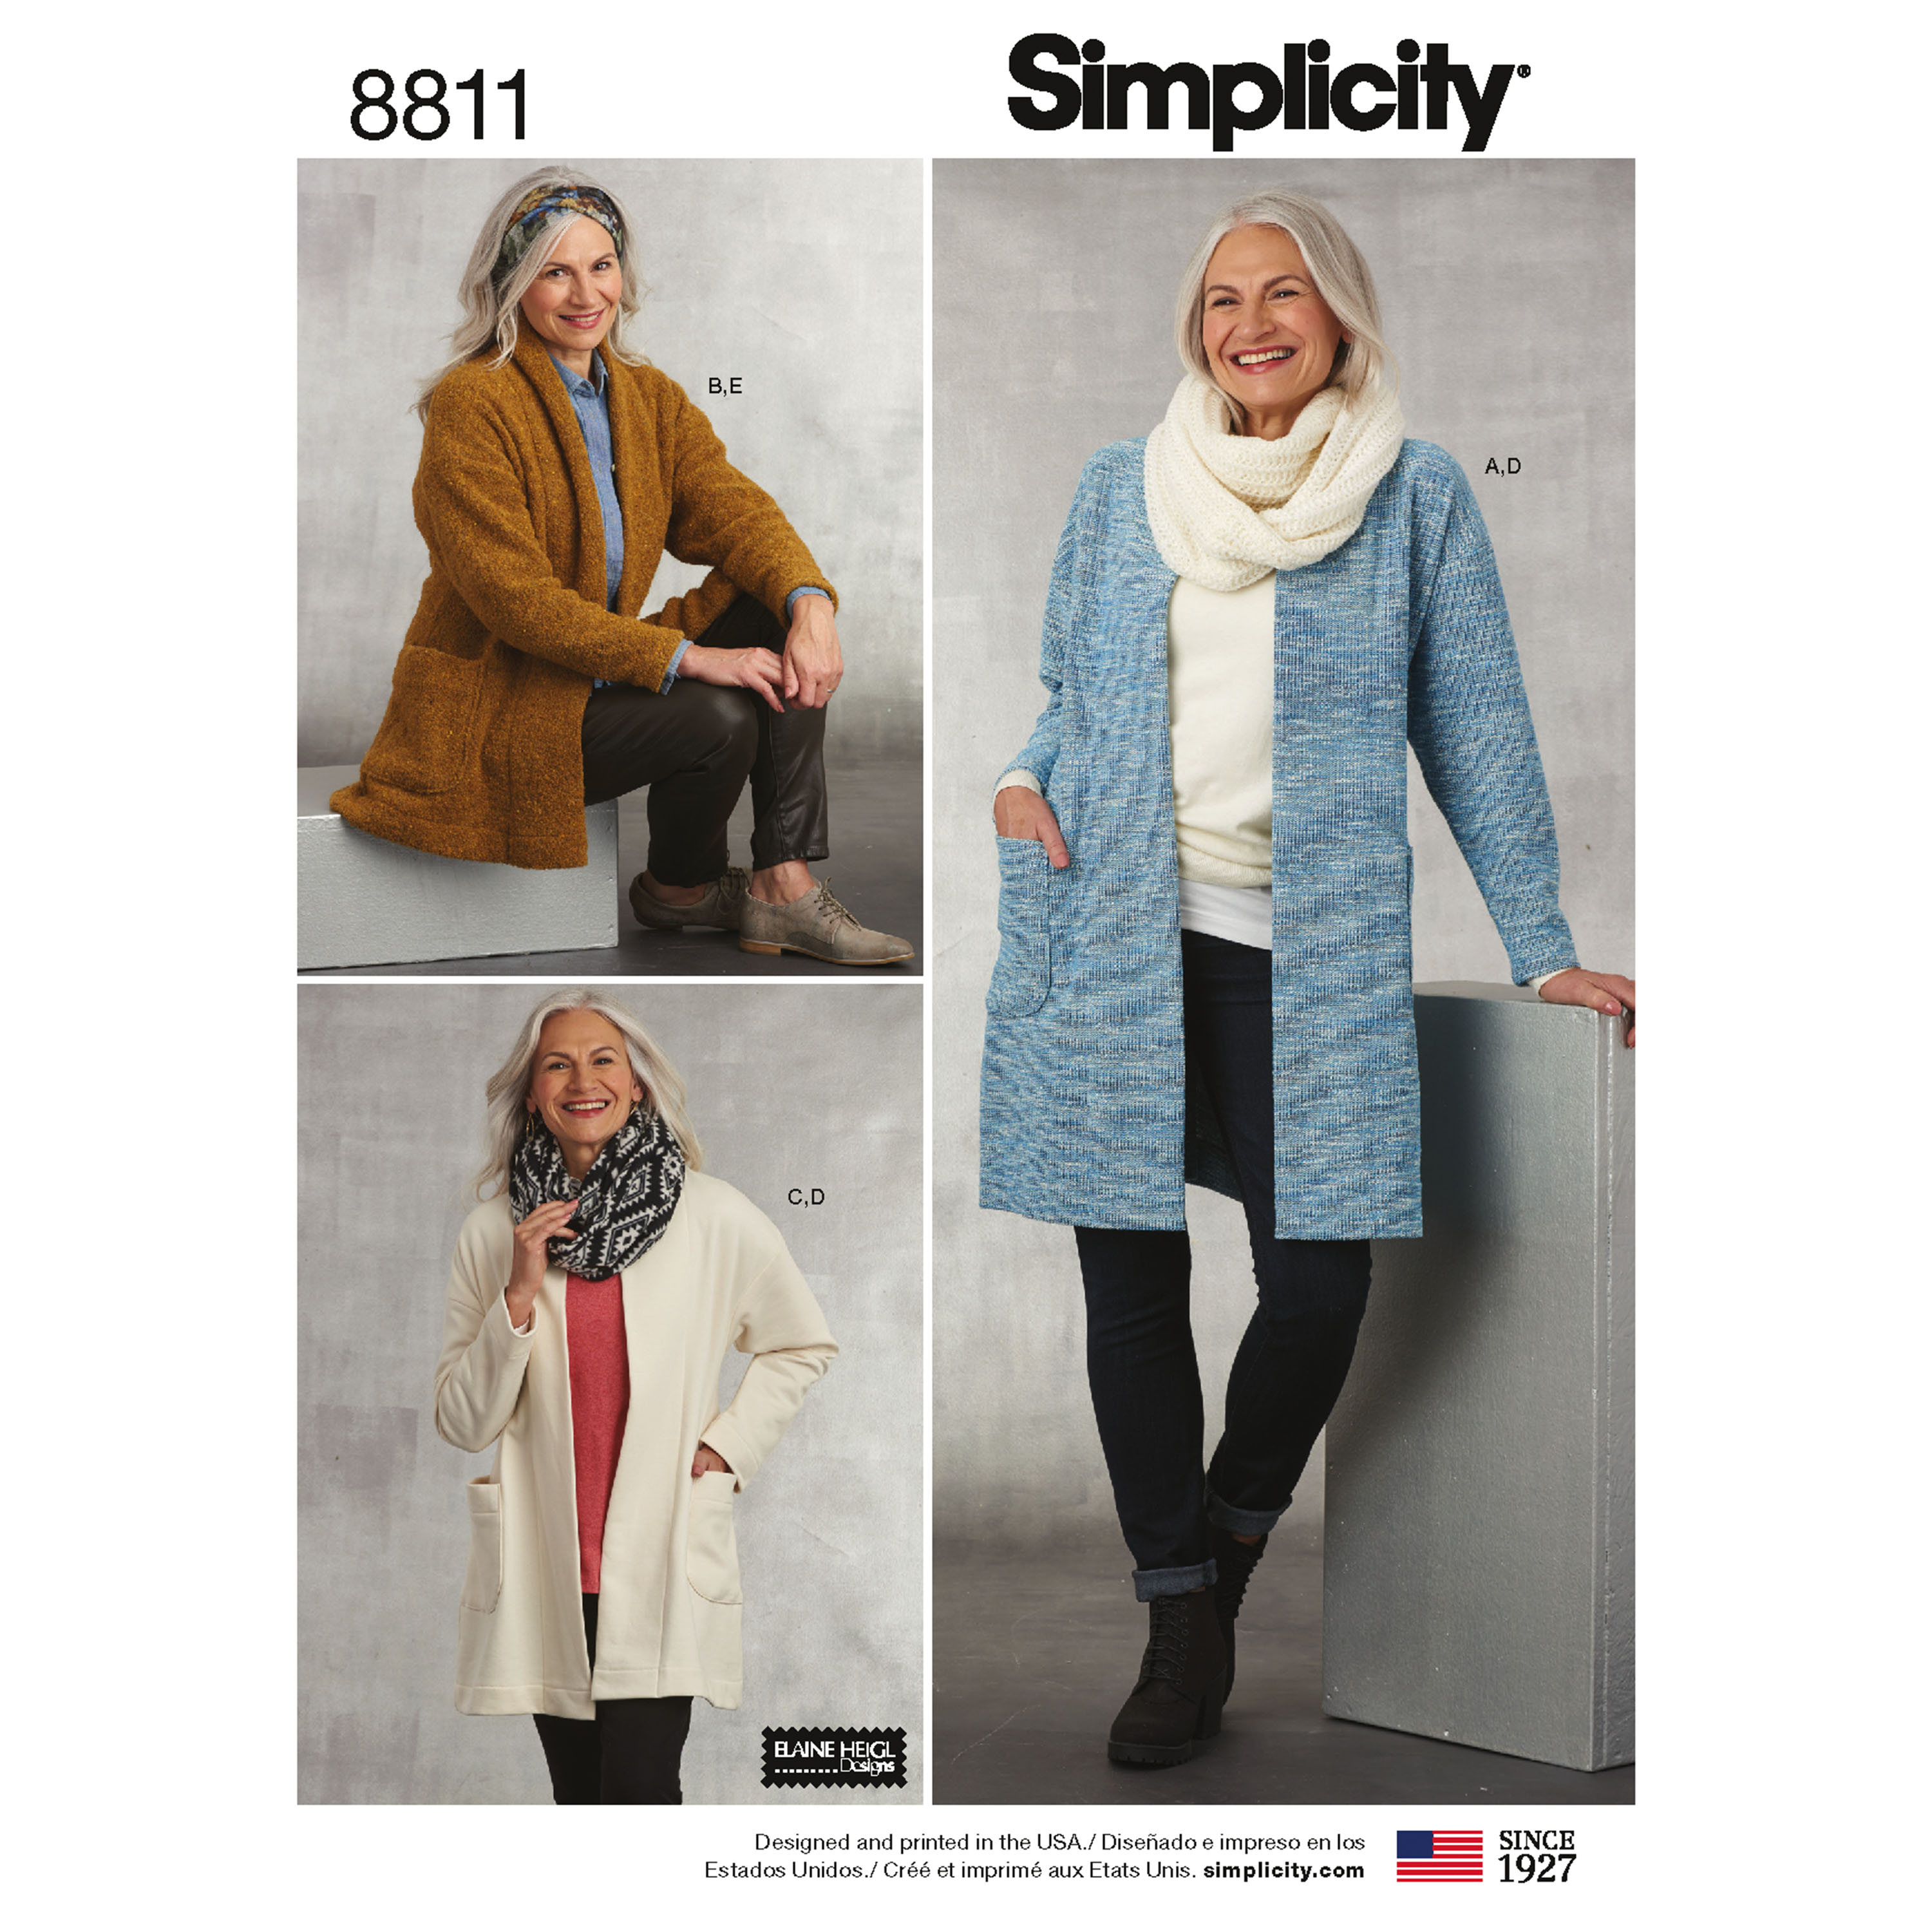 Simplicity 4782 Sewing Pattern Misses Loose Fitting Pullover Top Ponchos Scarf Toque Hat Outerwear Winter Wear  Fleece Size XS S M